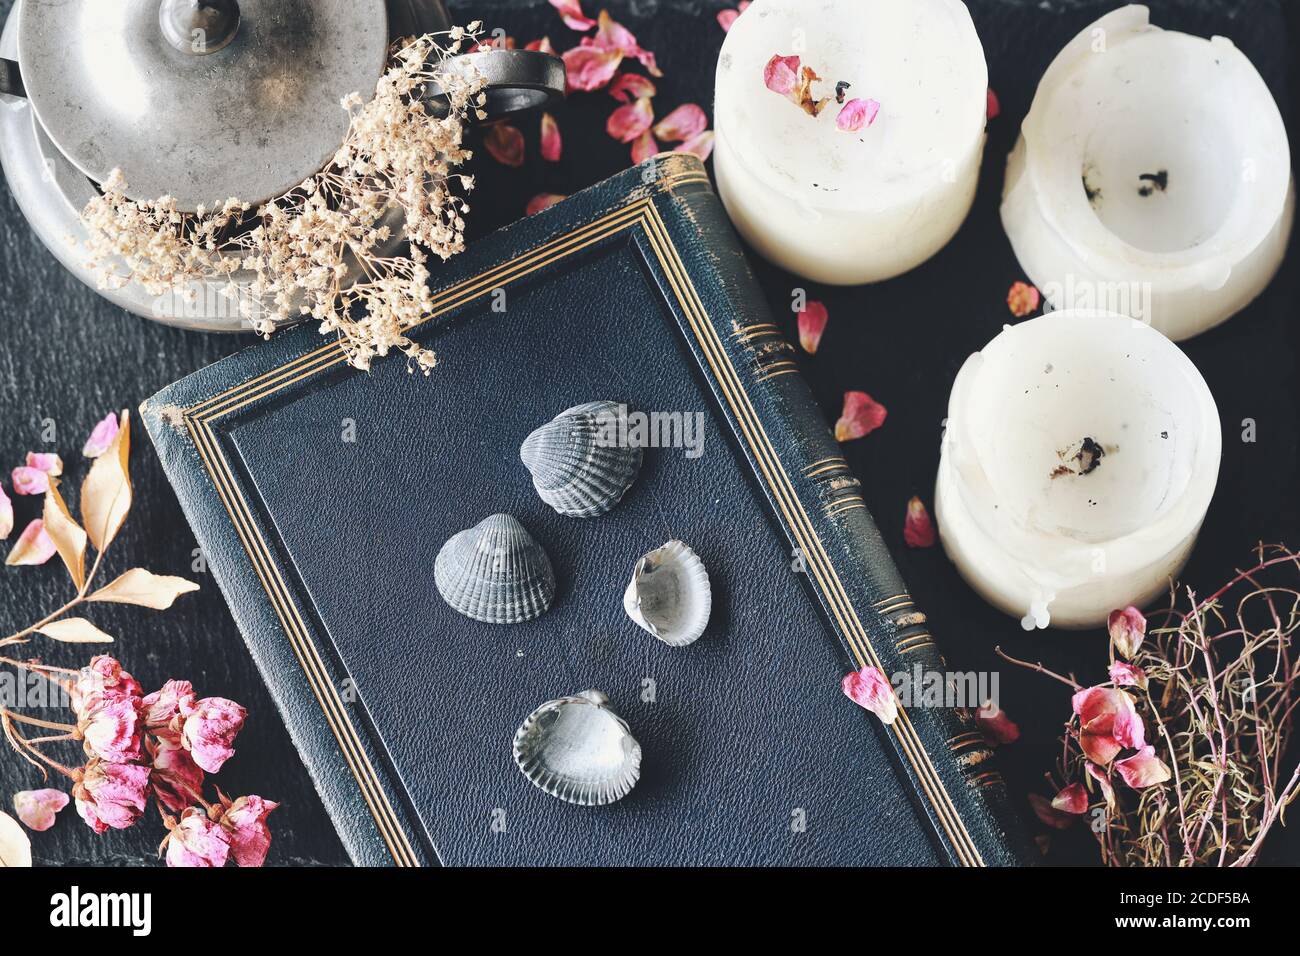 Divination using sea shells in hoodoo witchcraft practice on wiccan witch altar. Four seashells laying on blue vintage book Stock Photo